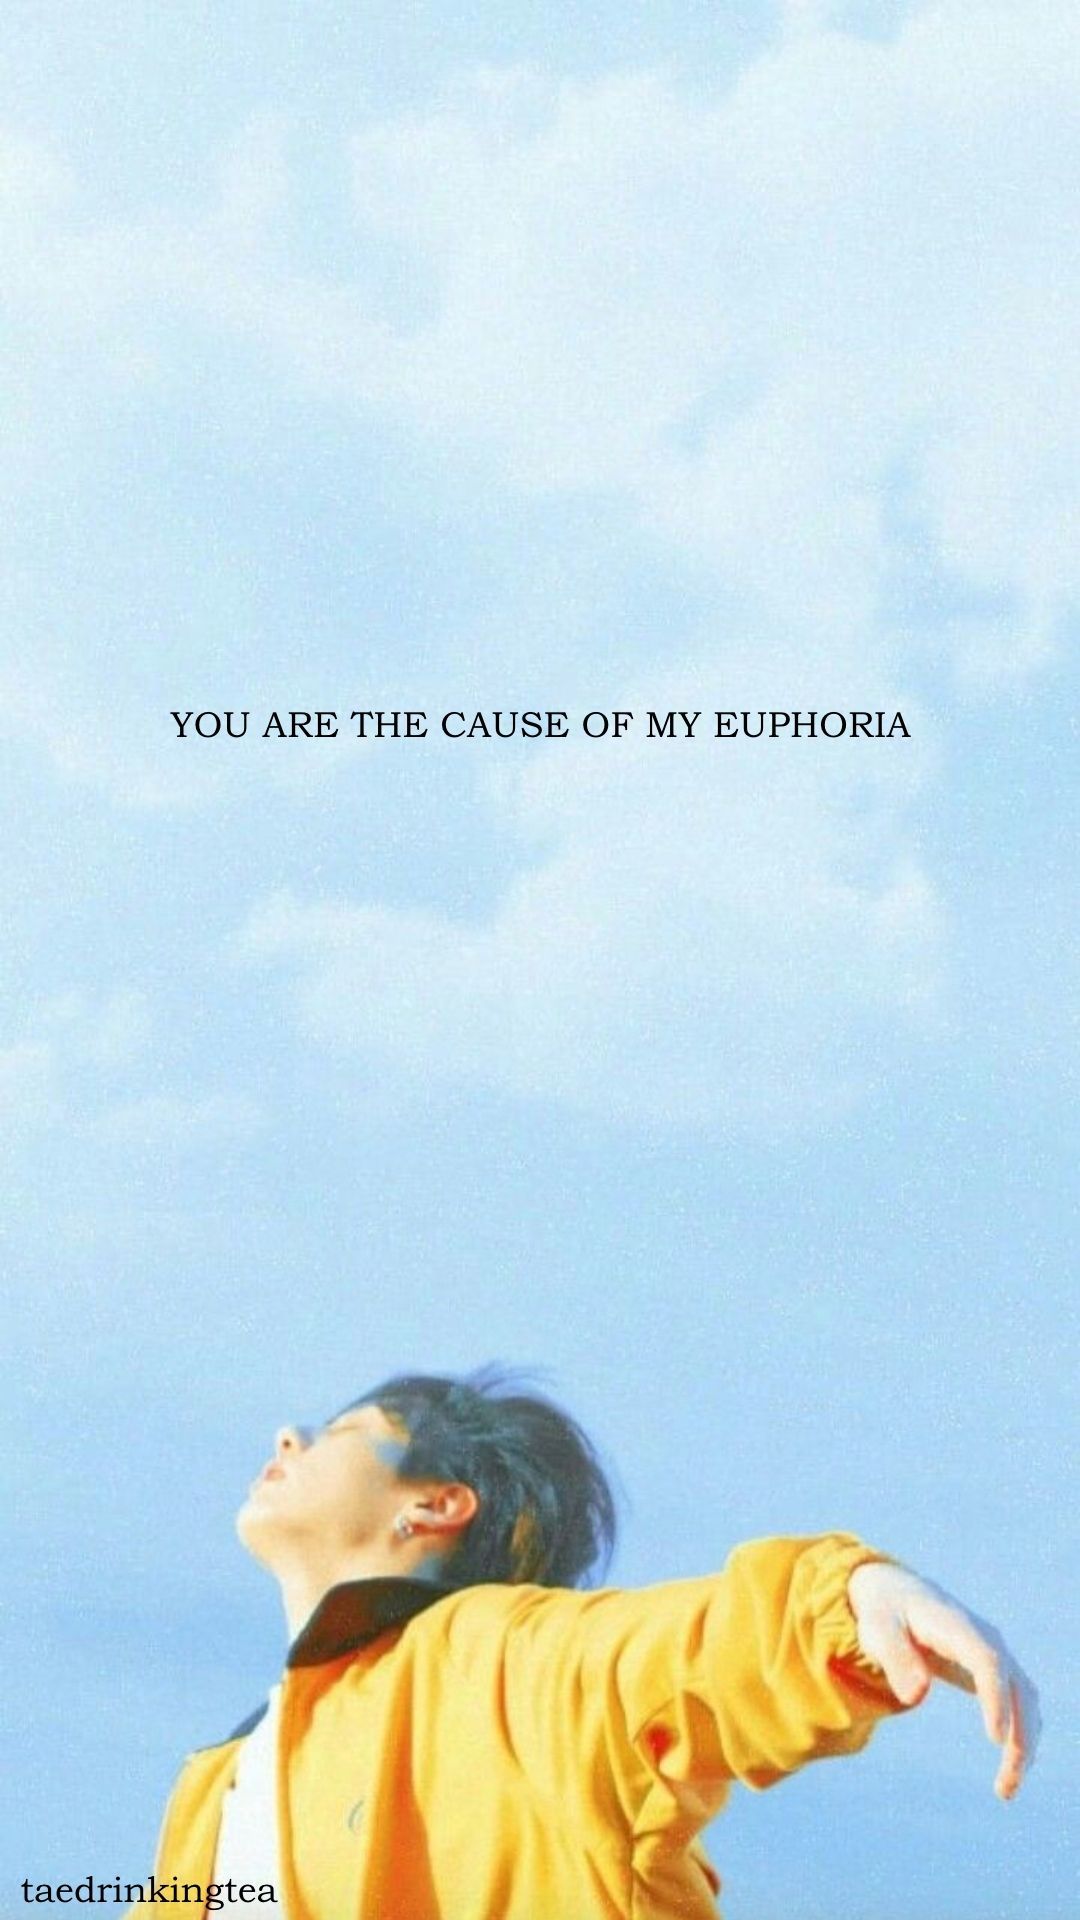 This another aesthetic wallpaper made by me. Jungkook version